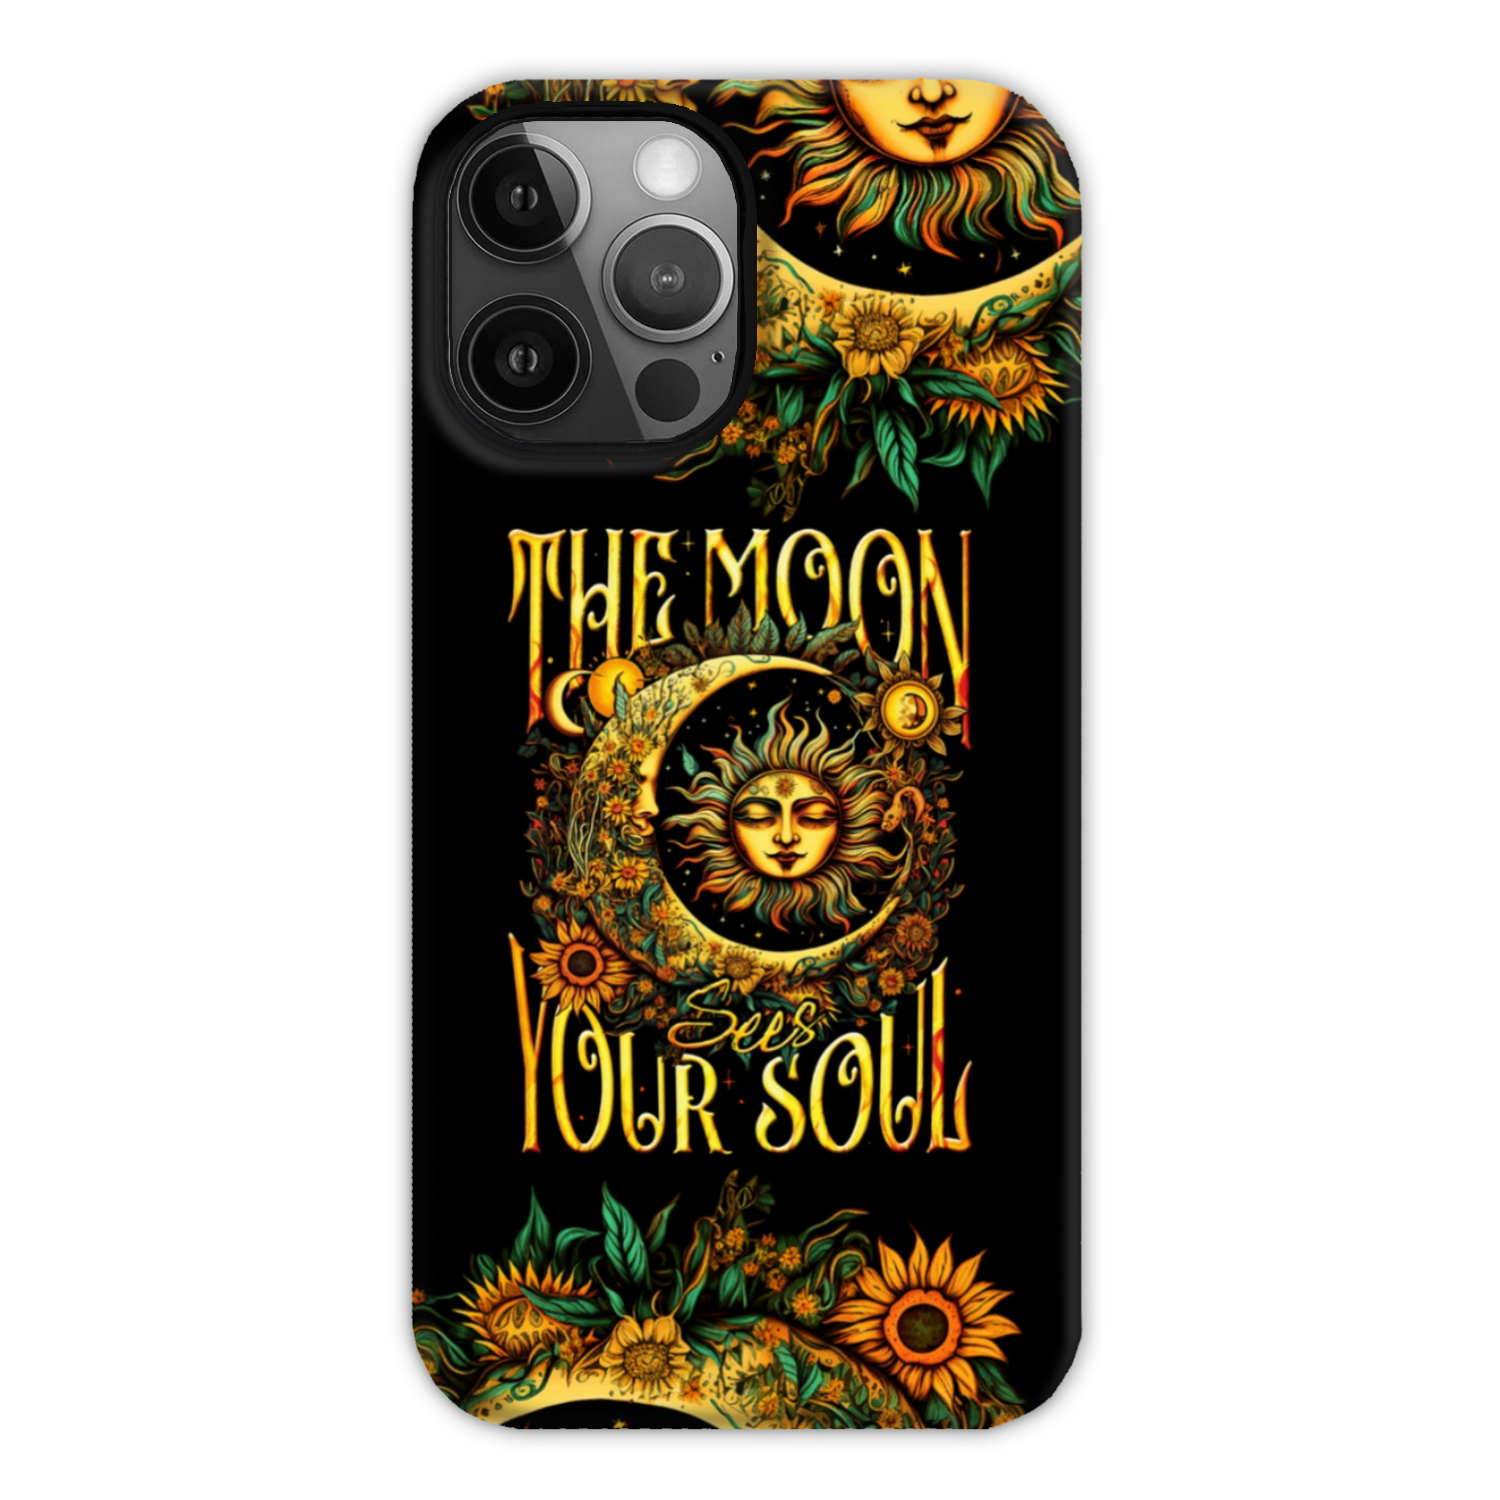 THE MOON SEES YOUR SOUL PHONE CASE - TY1104232